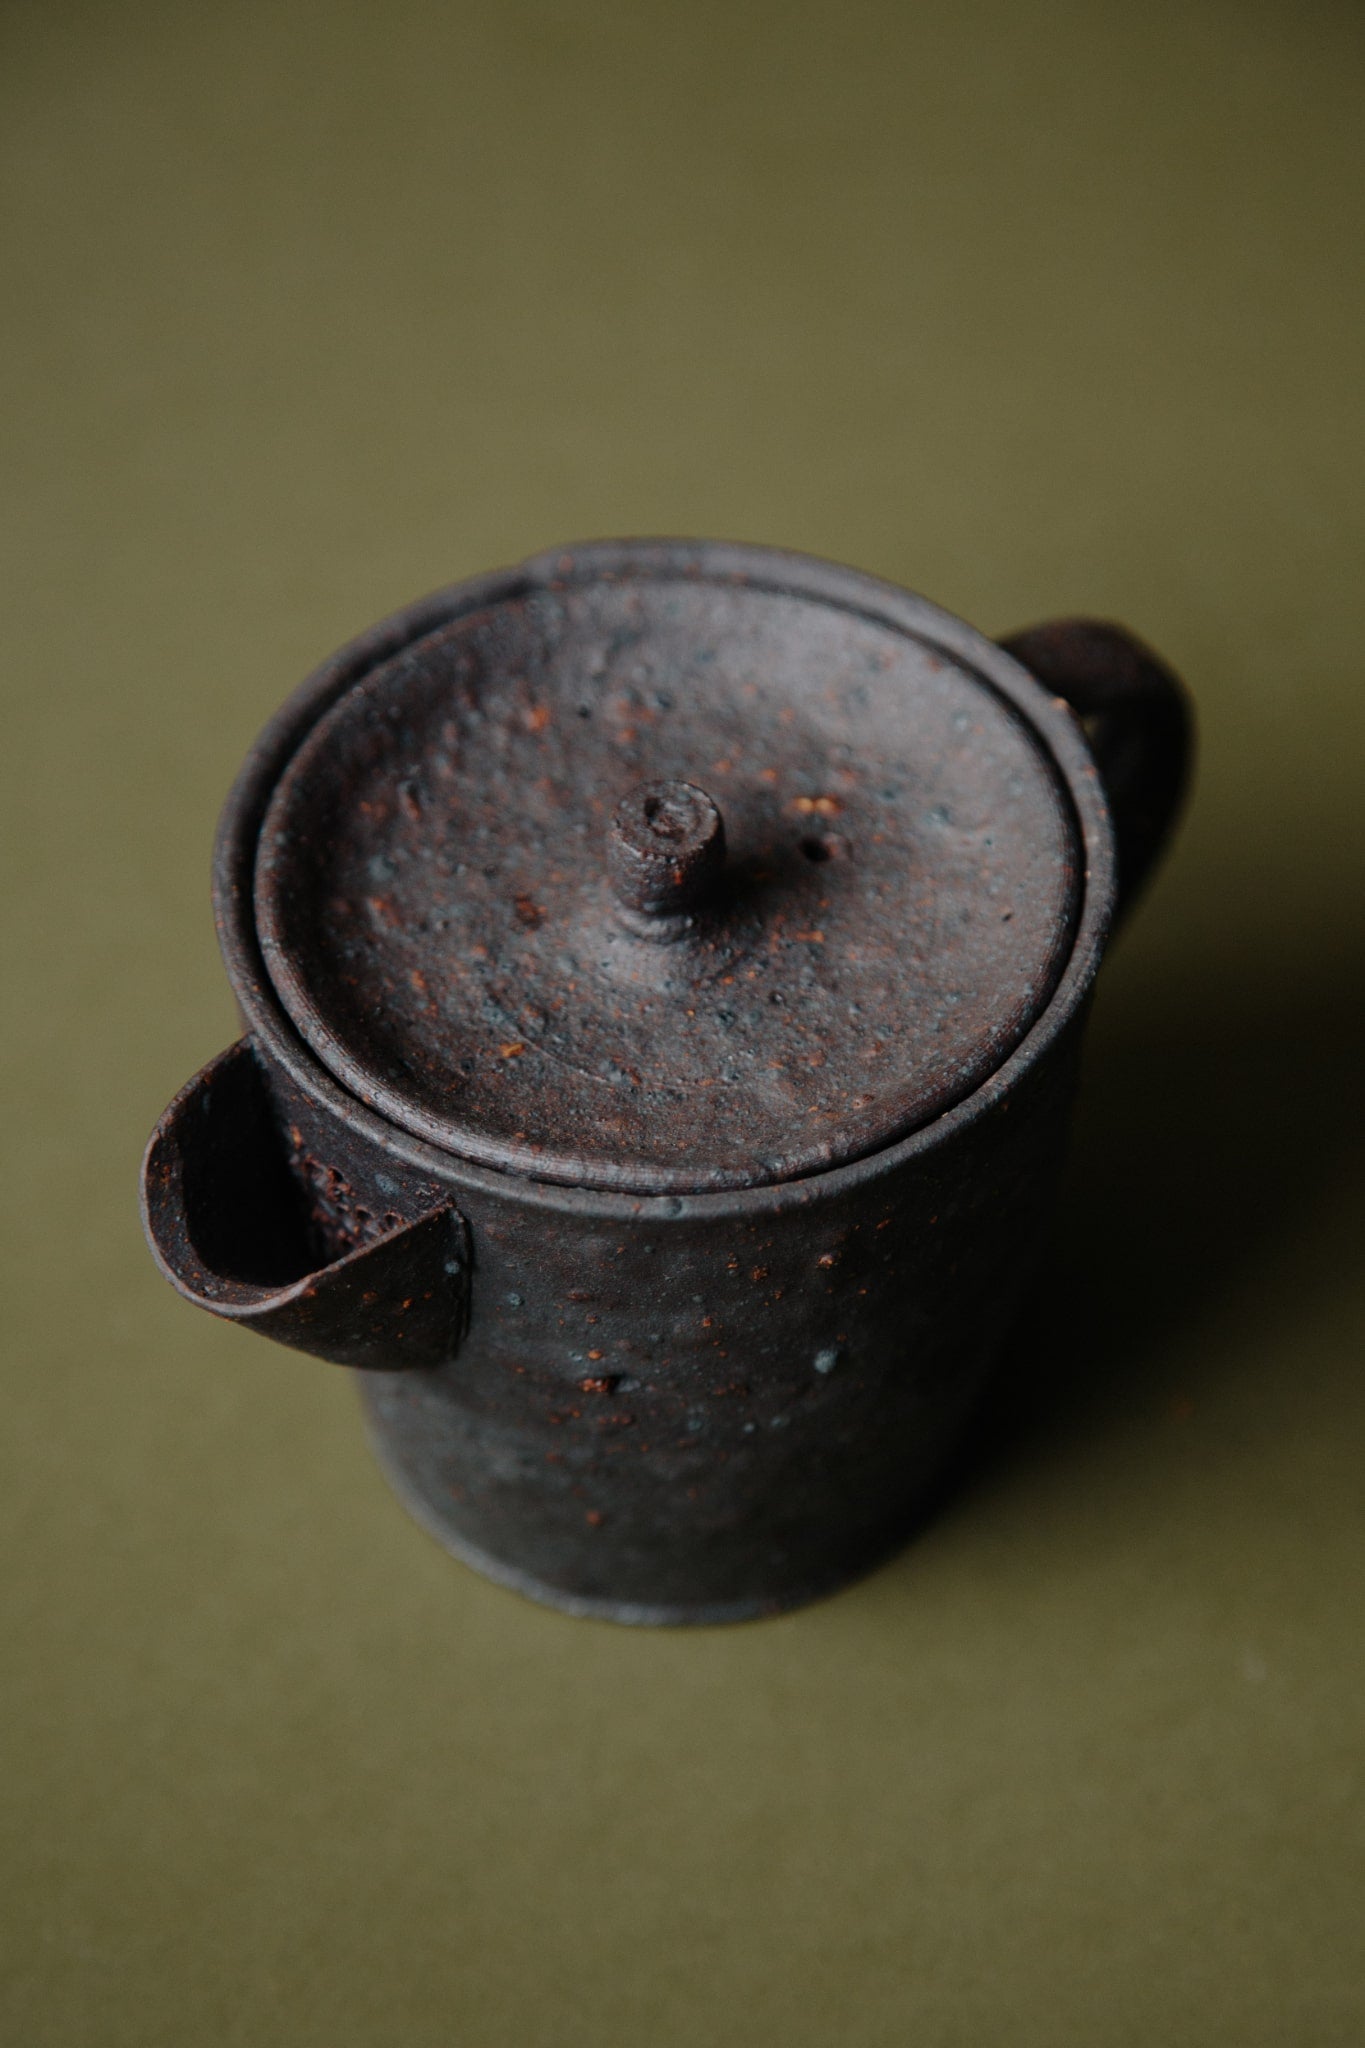 ALT=Small black ceramic teapot shot from above to see the join of the lid. The black surface is highly textured and beautifully sized for the hand.